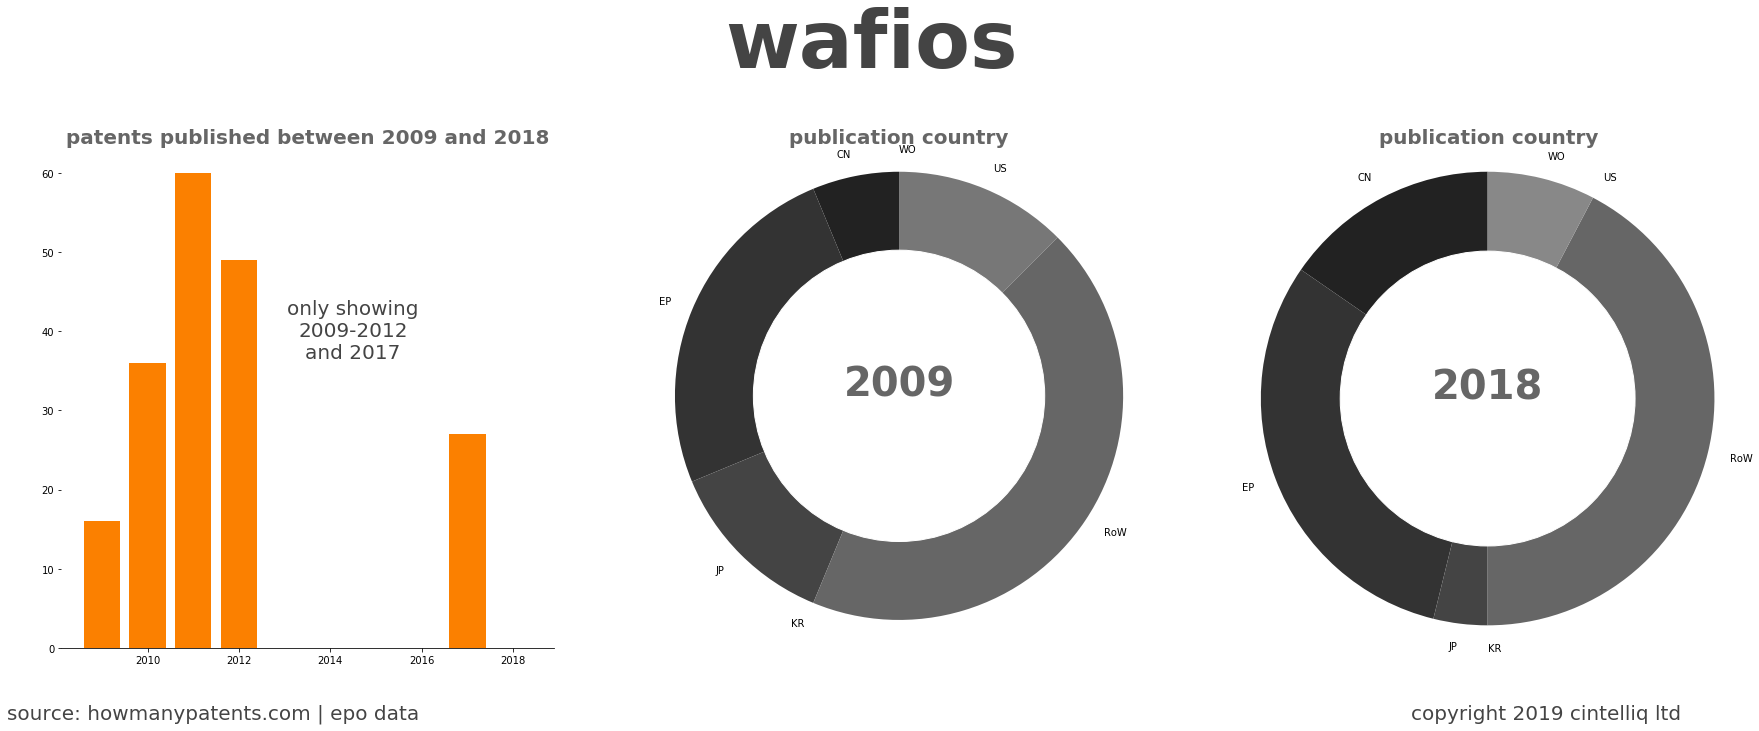 summary of patents for Wafios